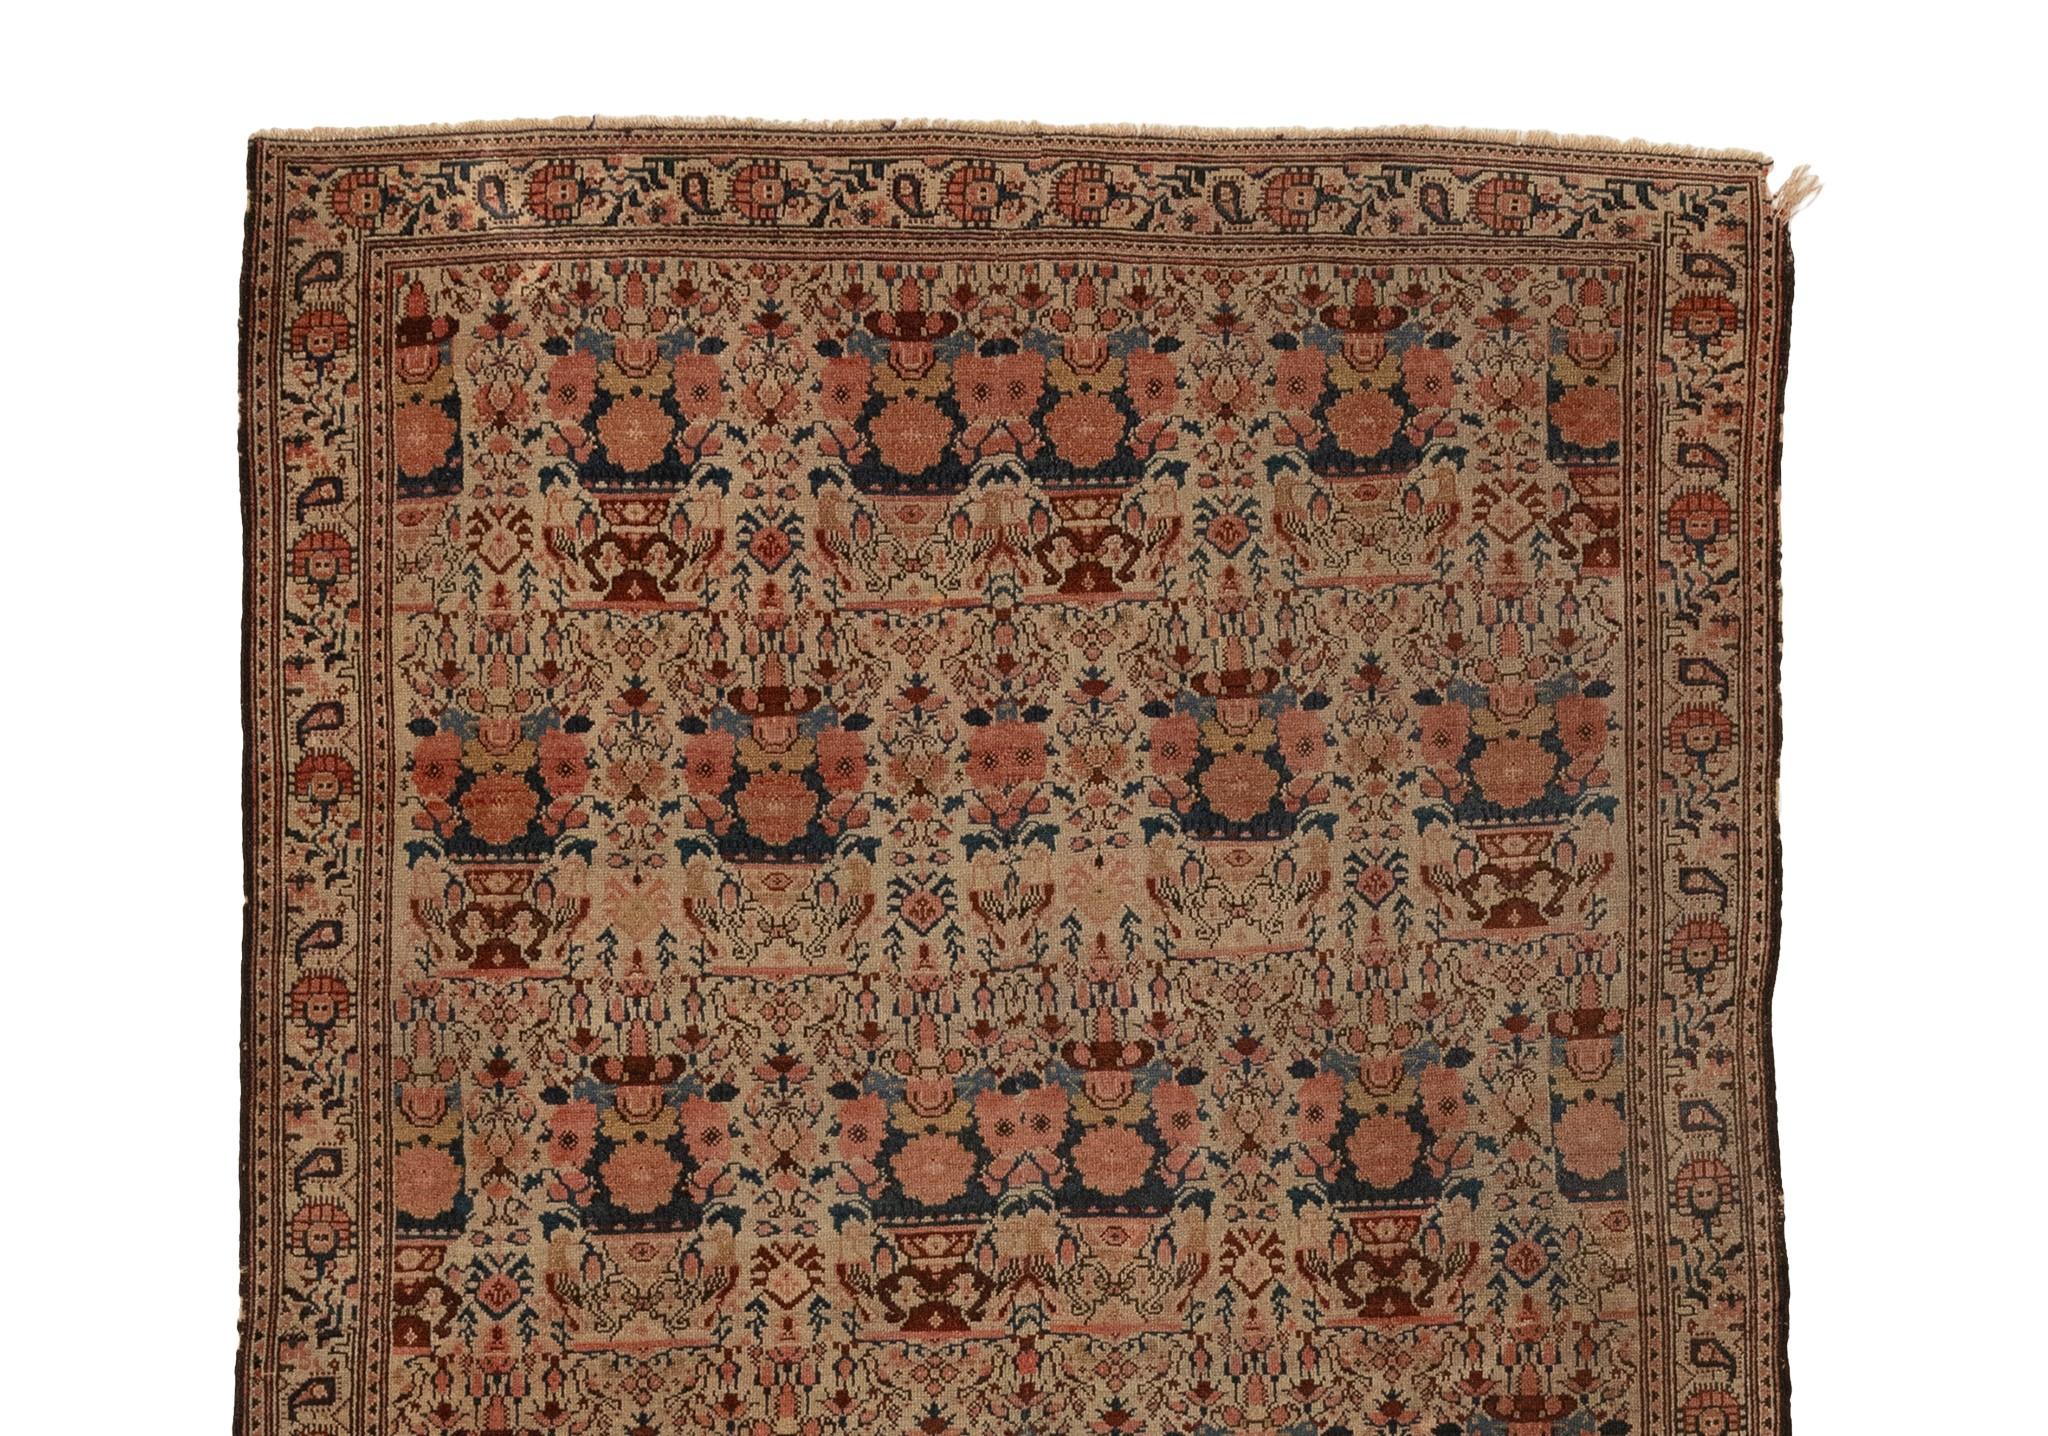 This antique Oriental rug from the 1880s boasts a mesmerizing floral design on an ivory field. Its timeless beauty radiates elegance and sophistication, elevating the aesthetic of any room it graces. This highly prized possession is only fully